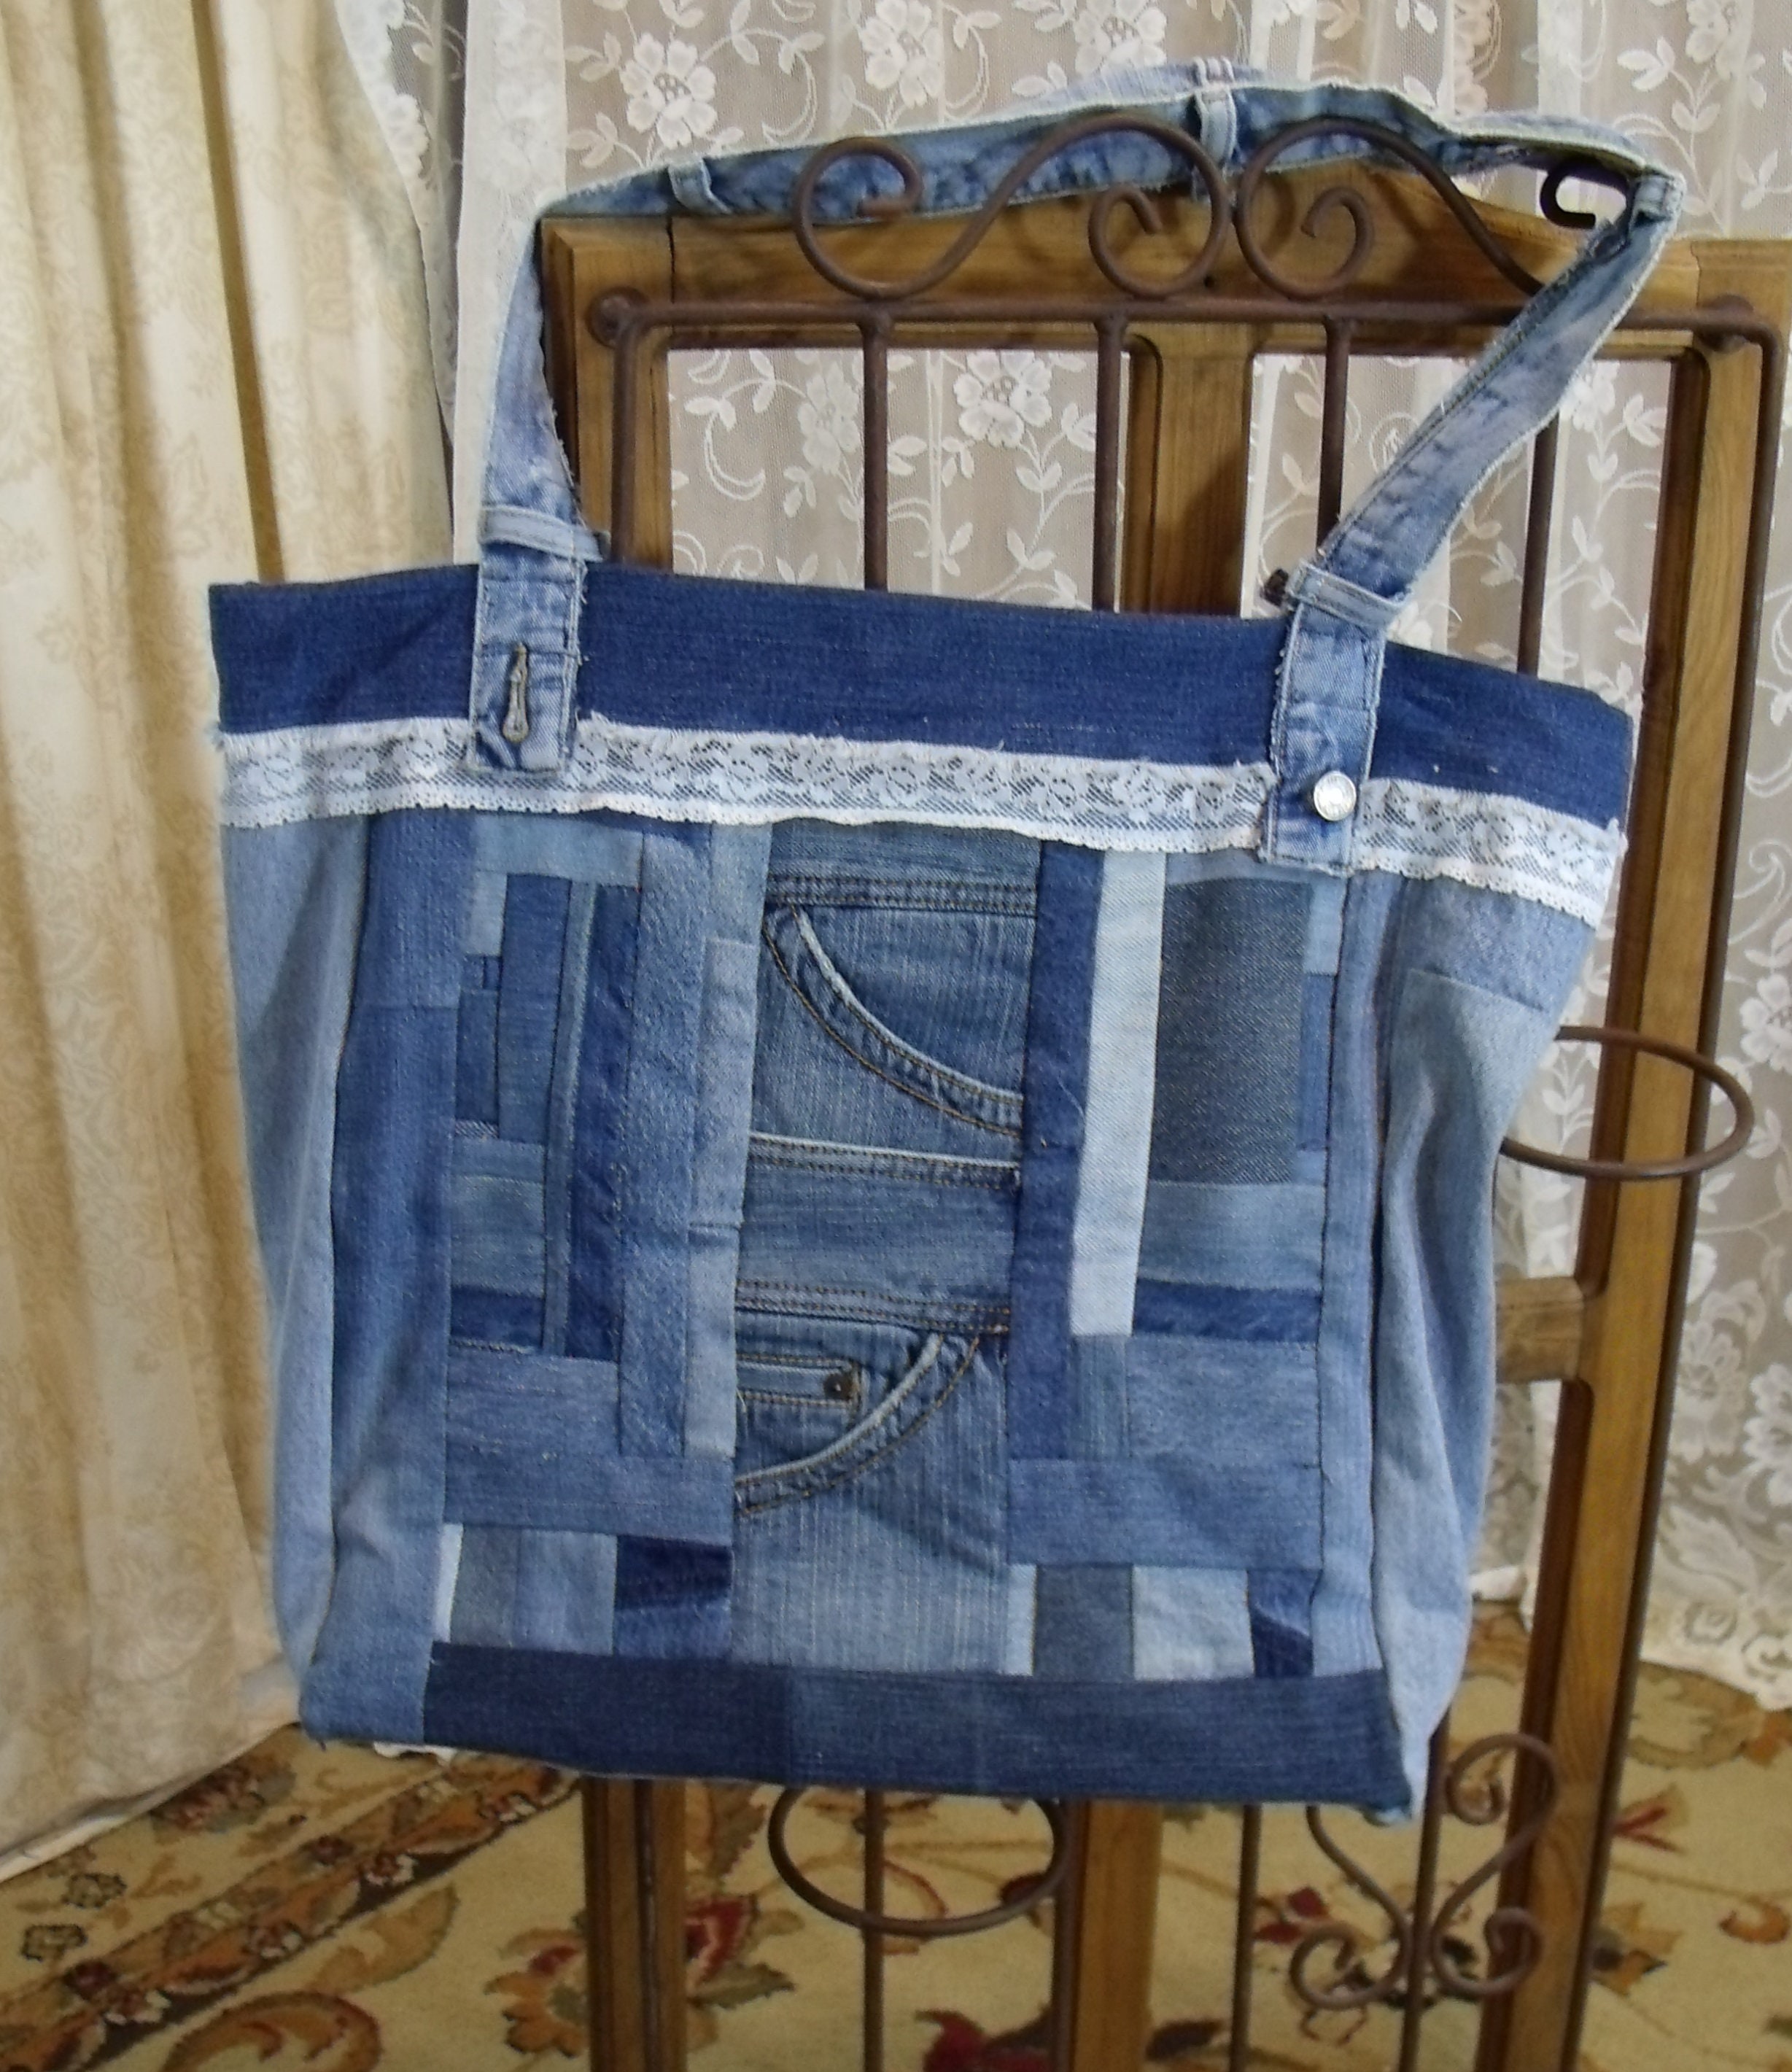 Recycled Jeans Shoulder Bag 16x16x5 Shabby-chic Hobo - Etsy